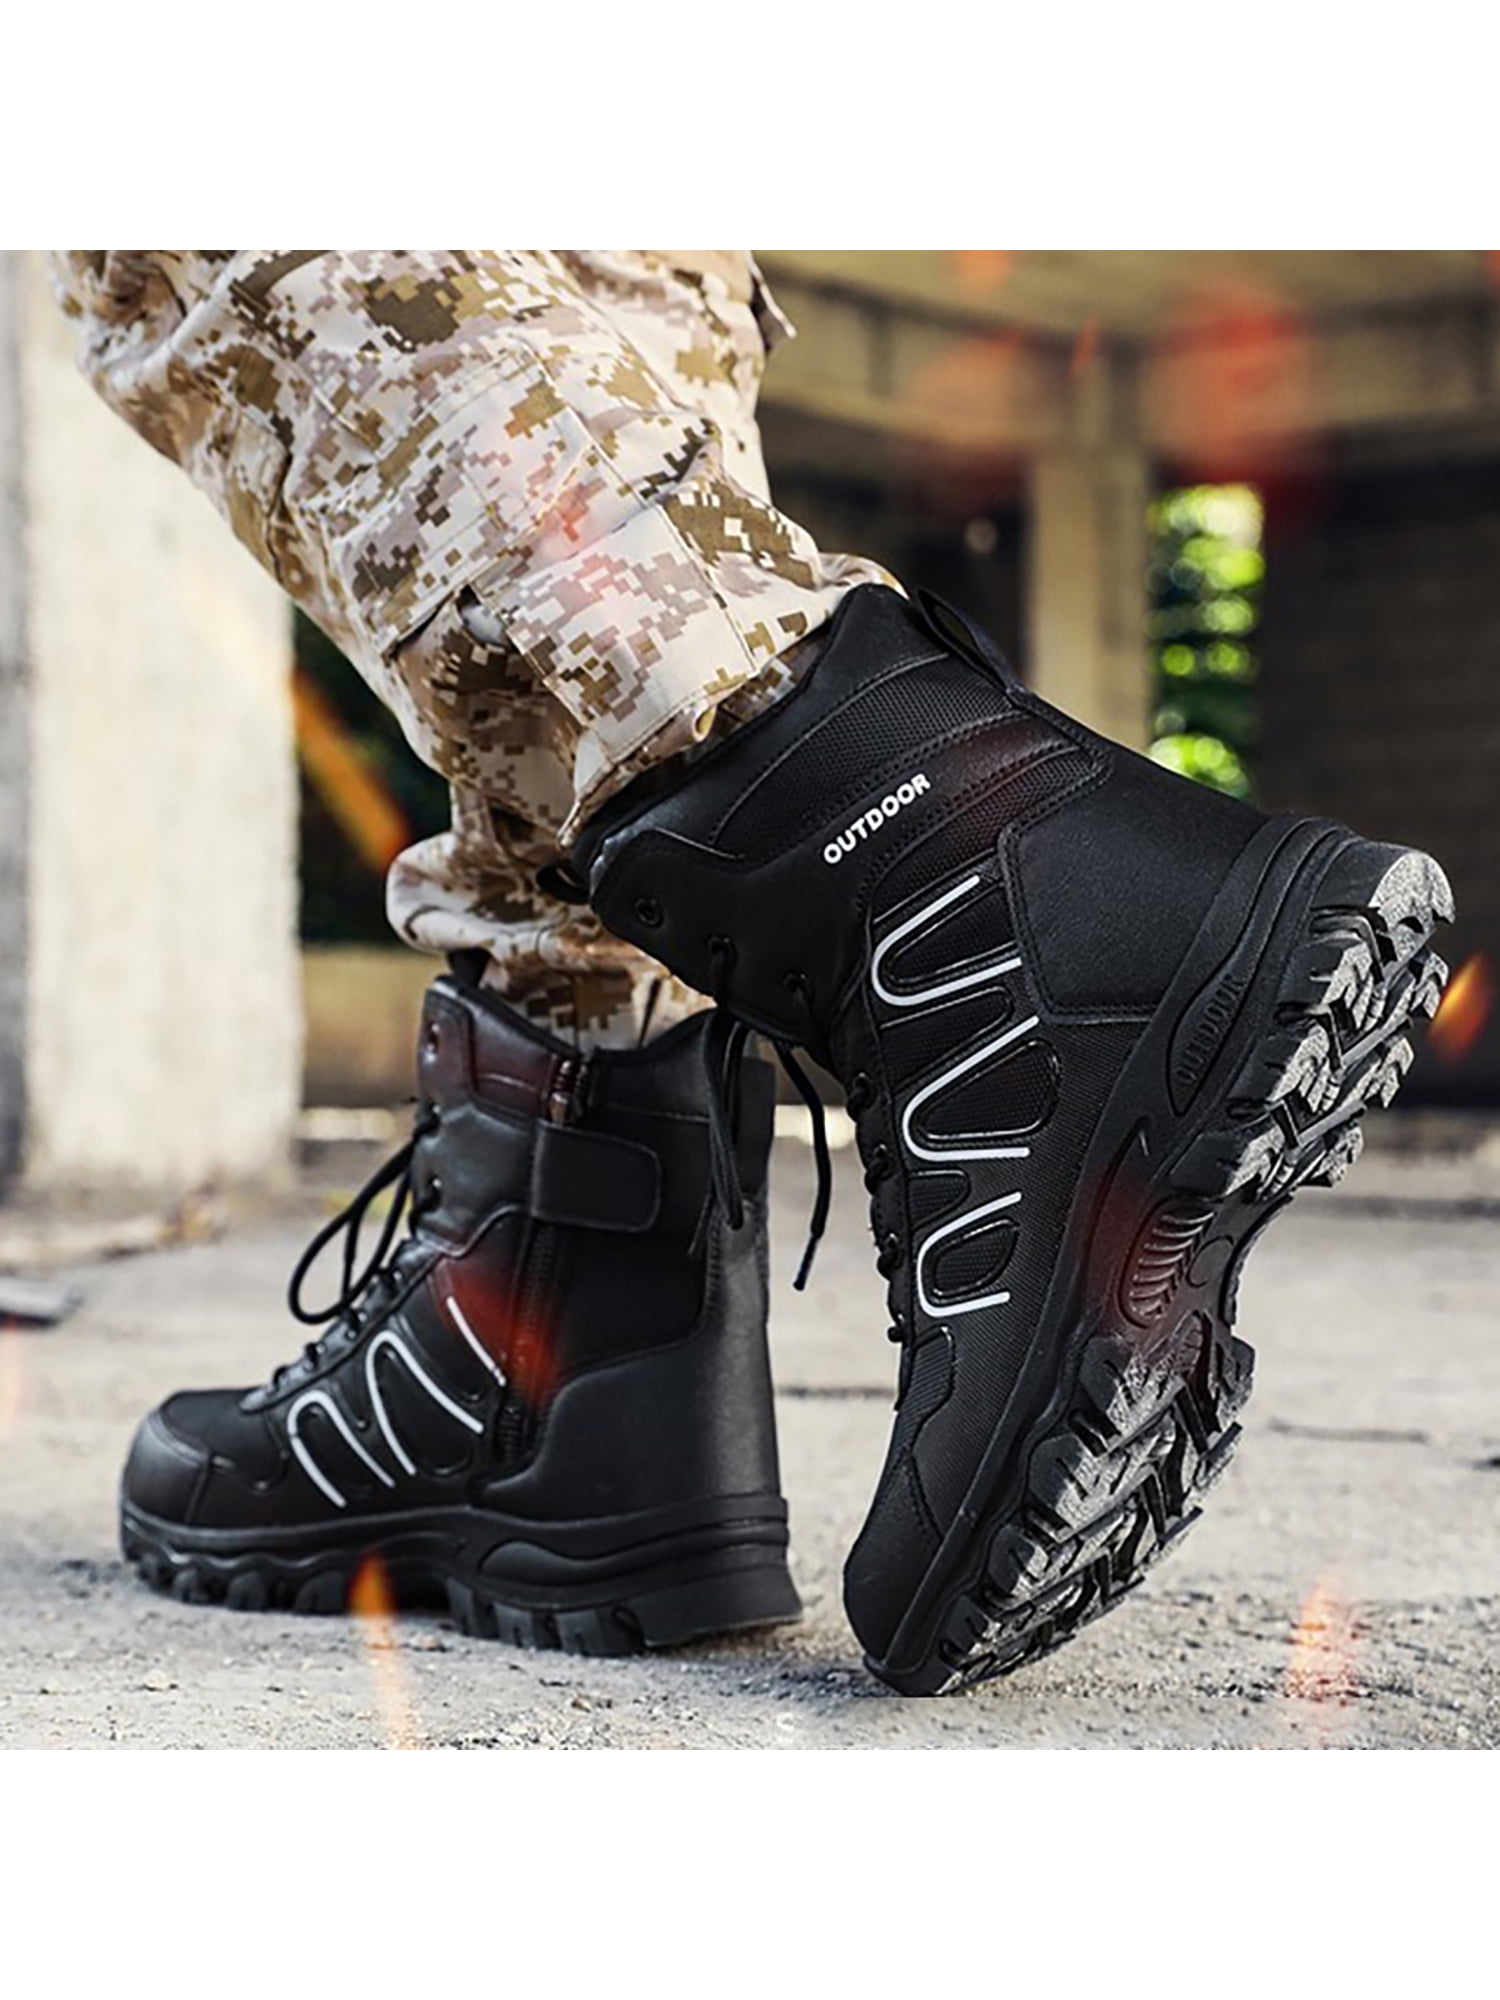 MENS ARMY COMBAT PATROL TACTICAL BOOTS CADET MILITARY SECURITY WORK POLICE SHOES 